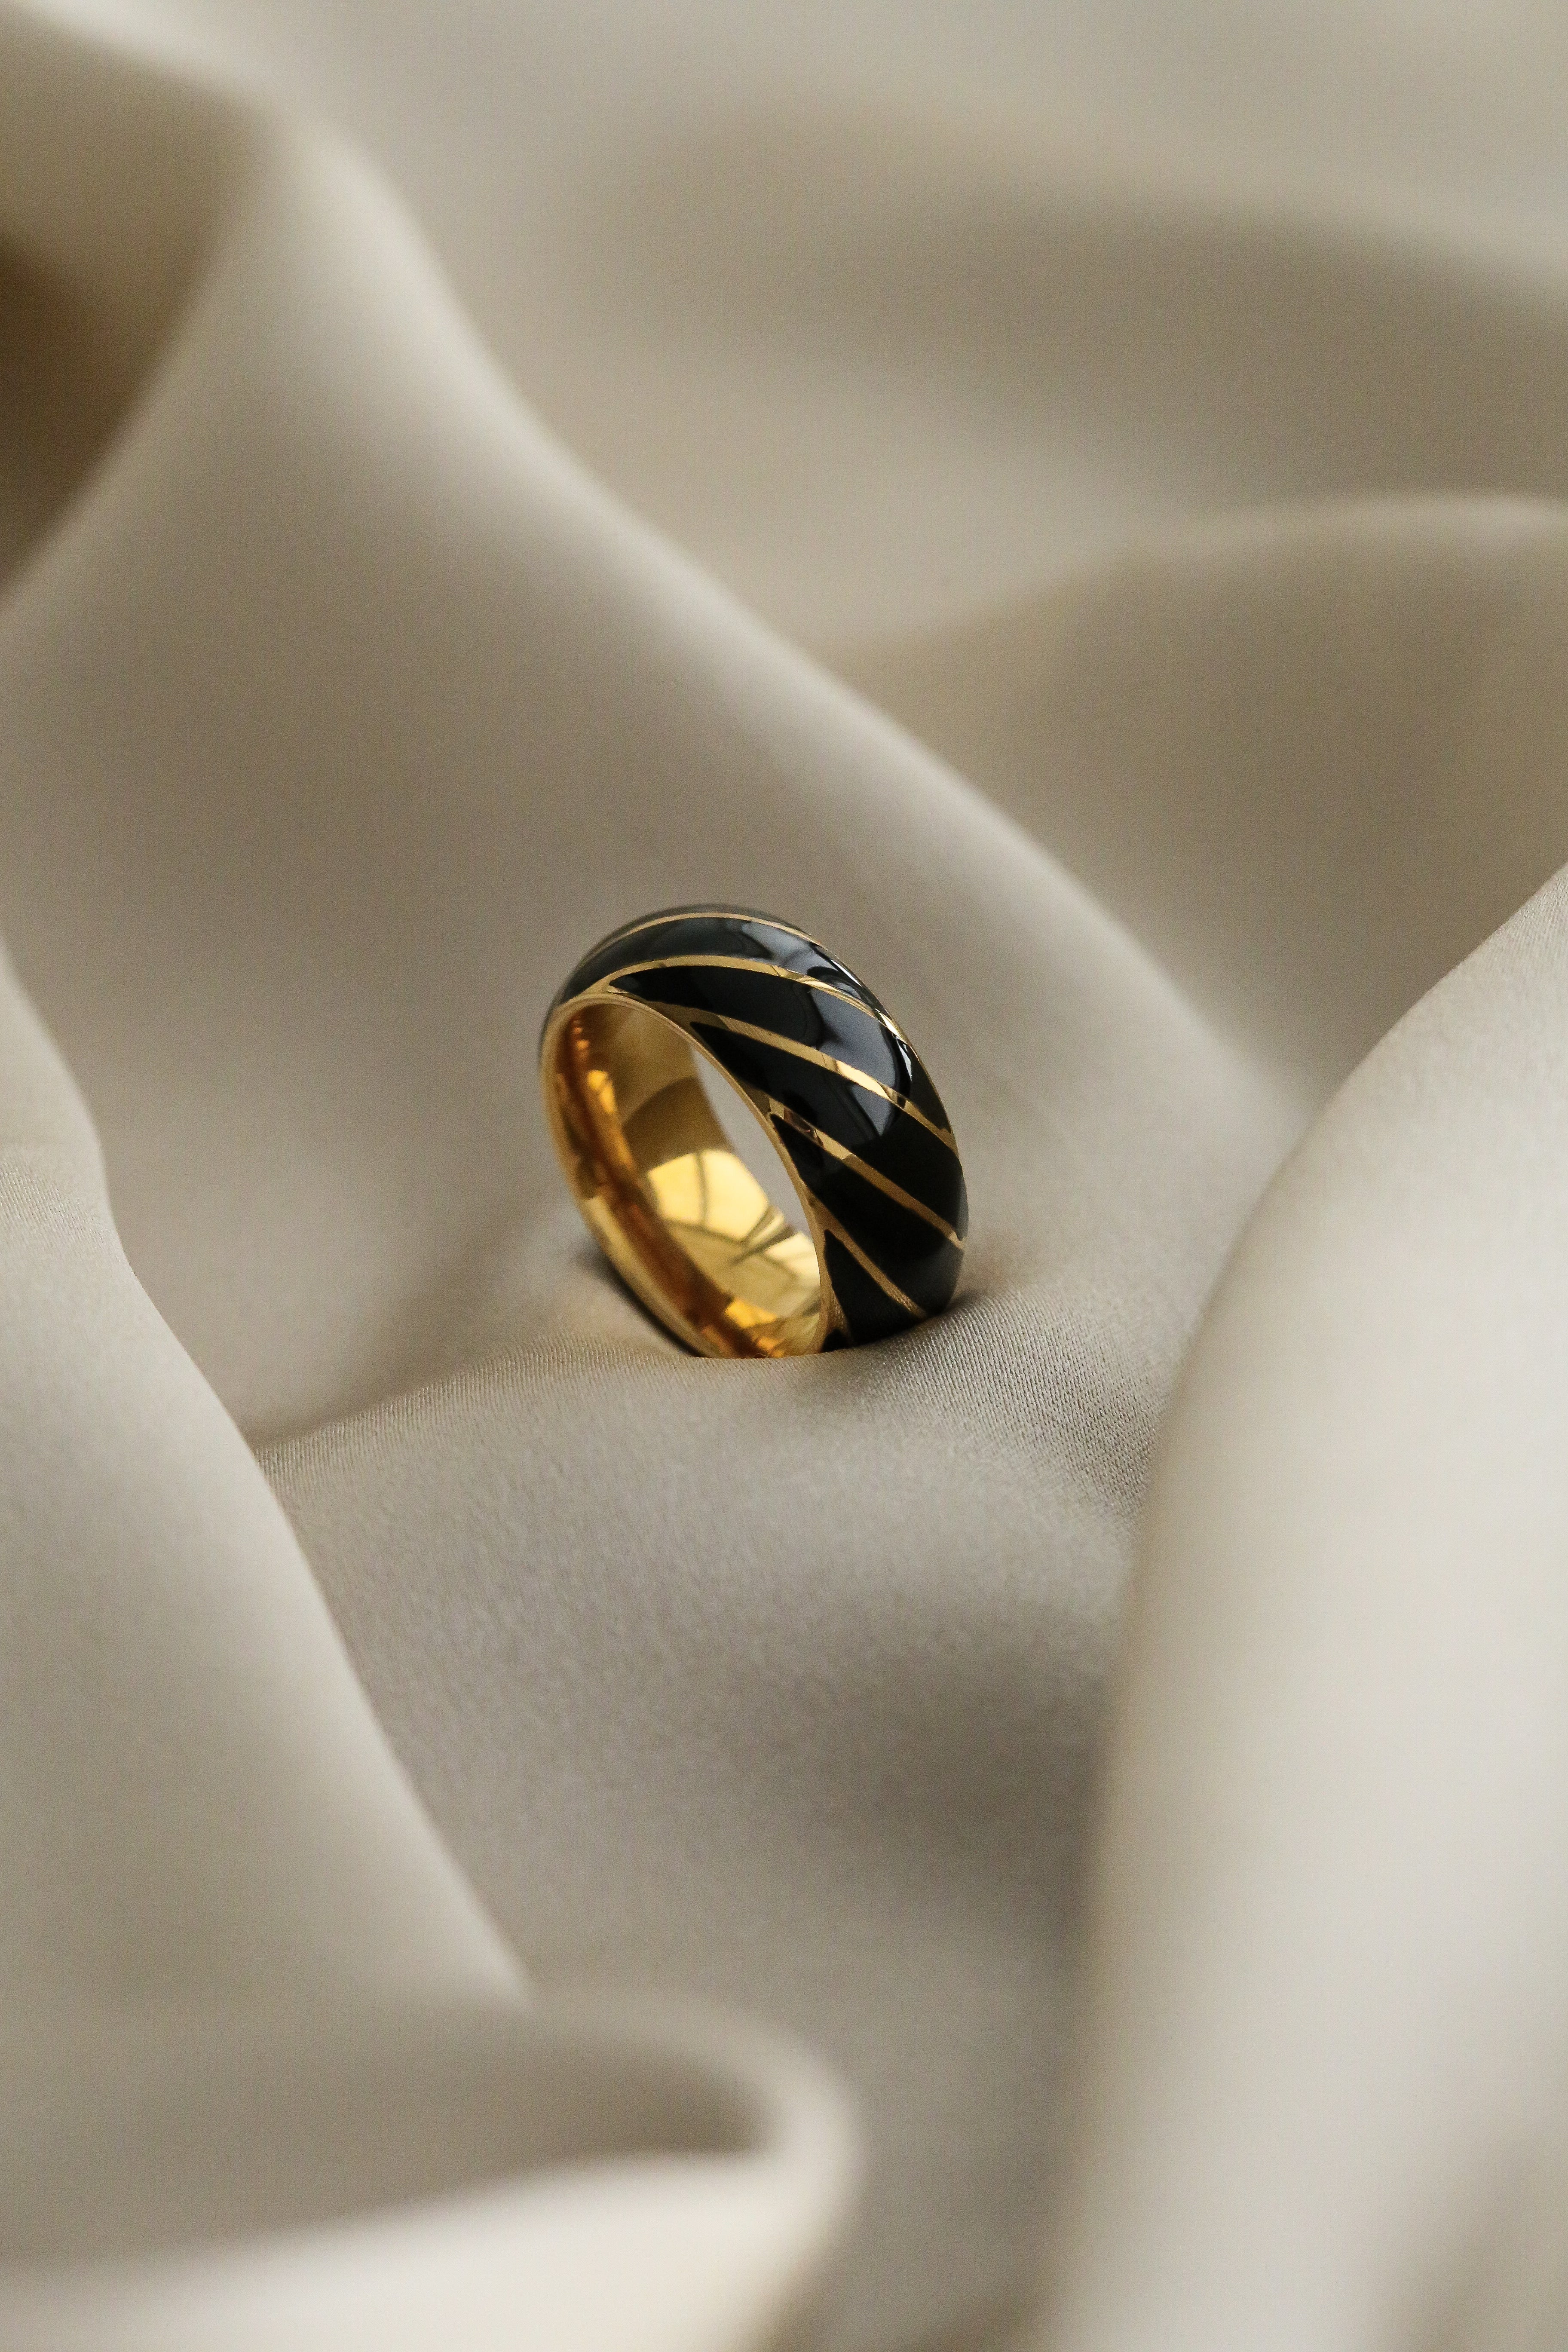 Kathy Ring - Boutique Minimaliste has waterproof, durable, elegant and vintage inspired jewelry